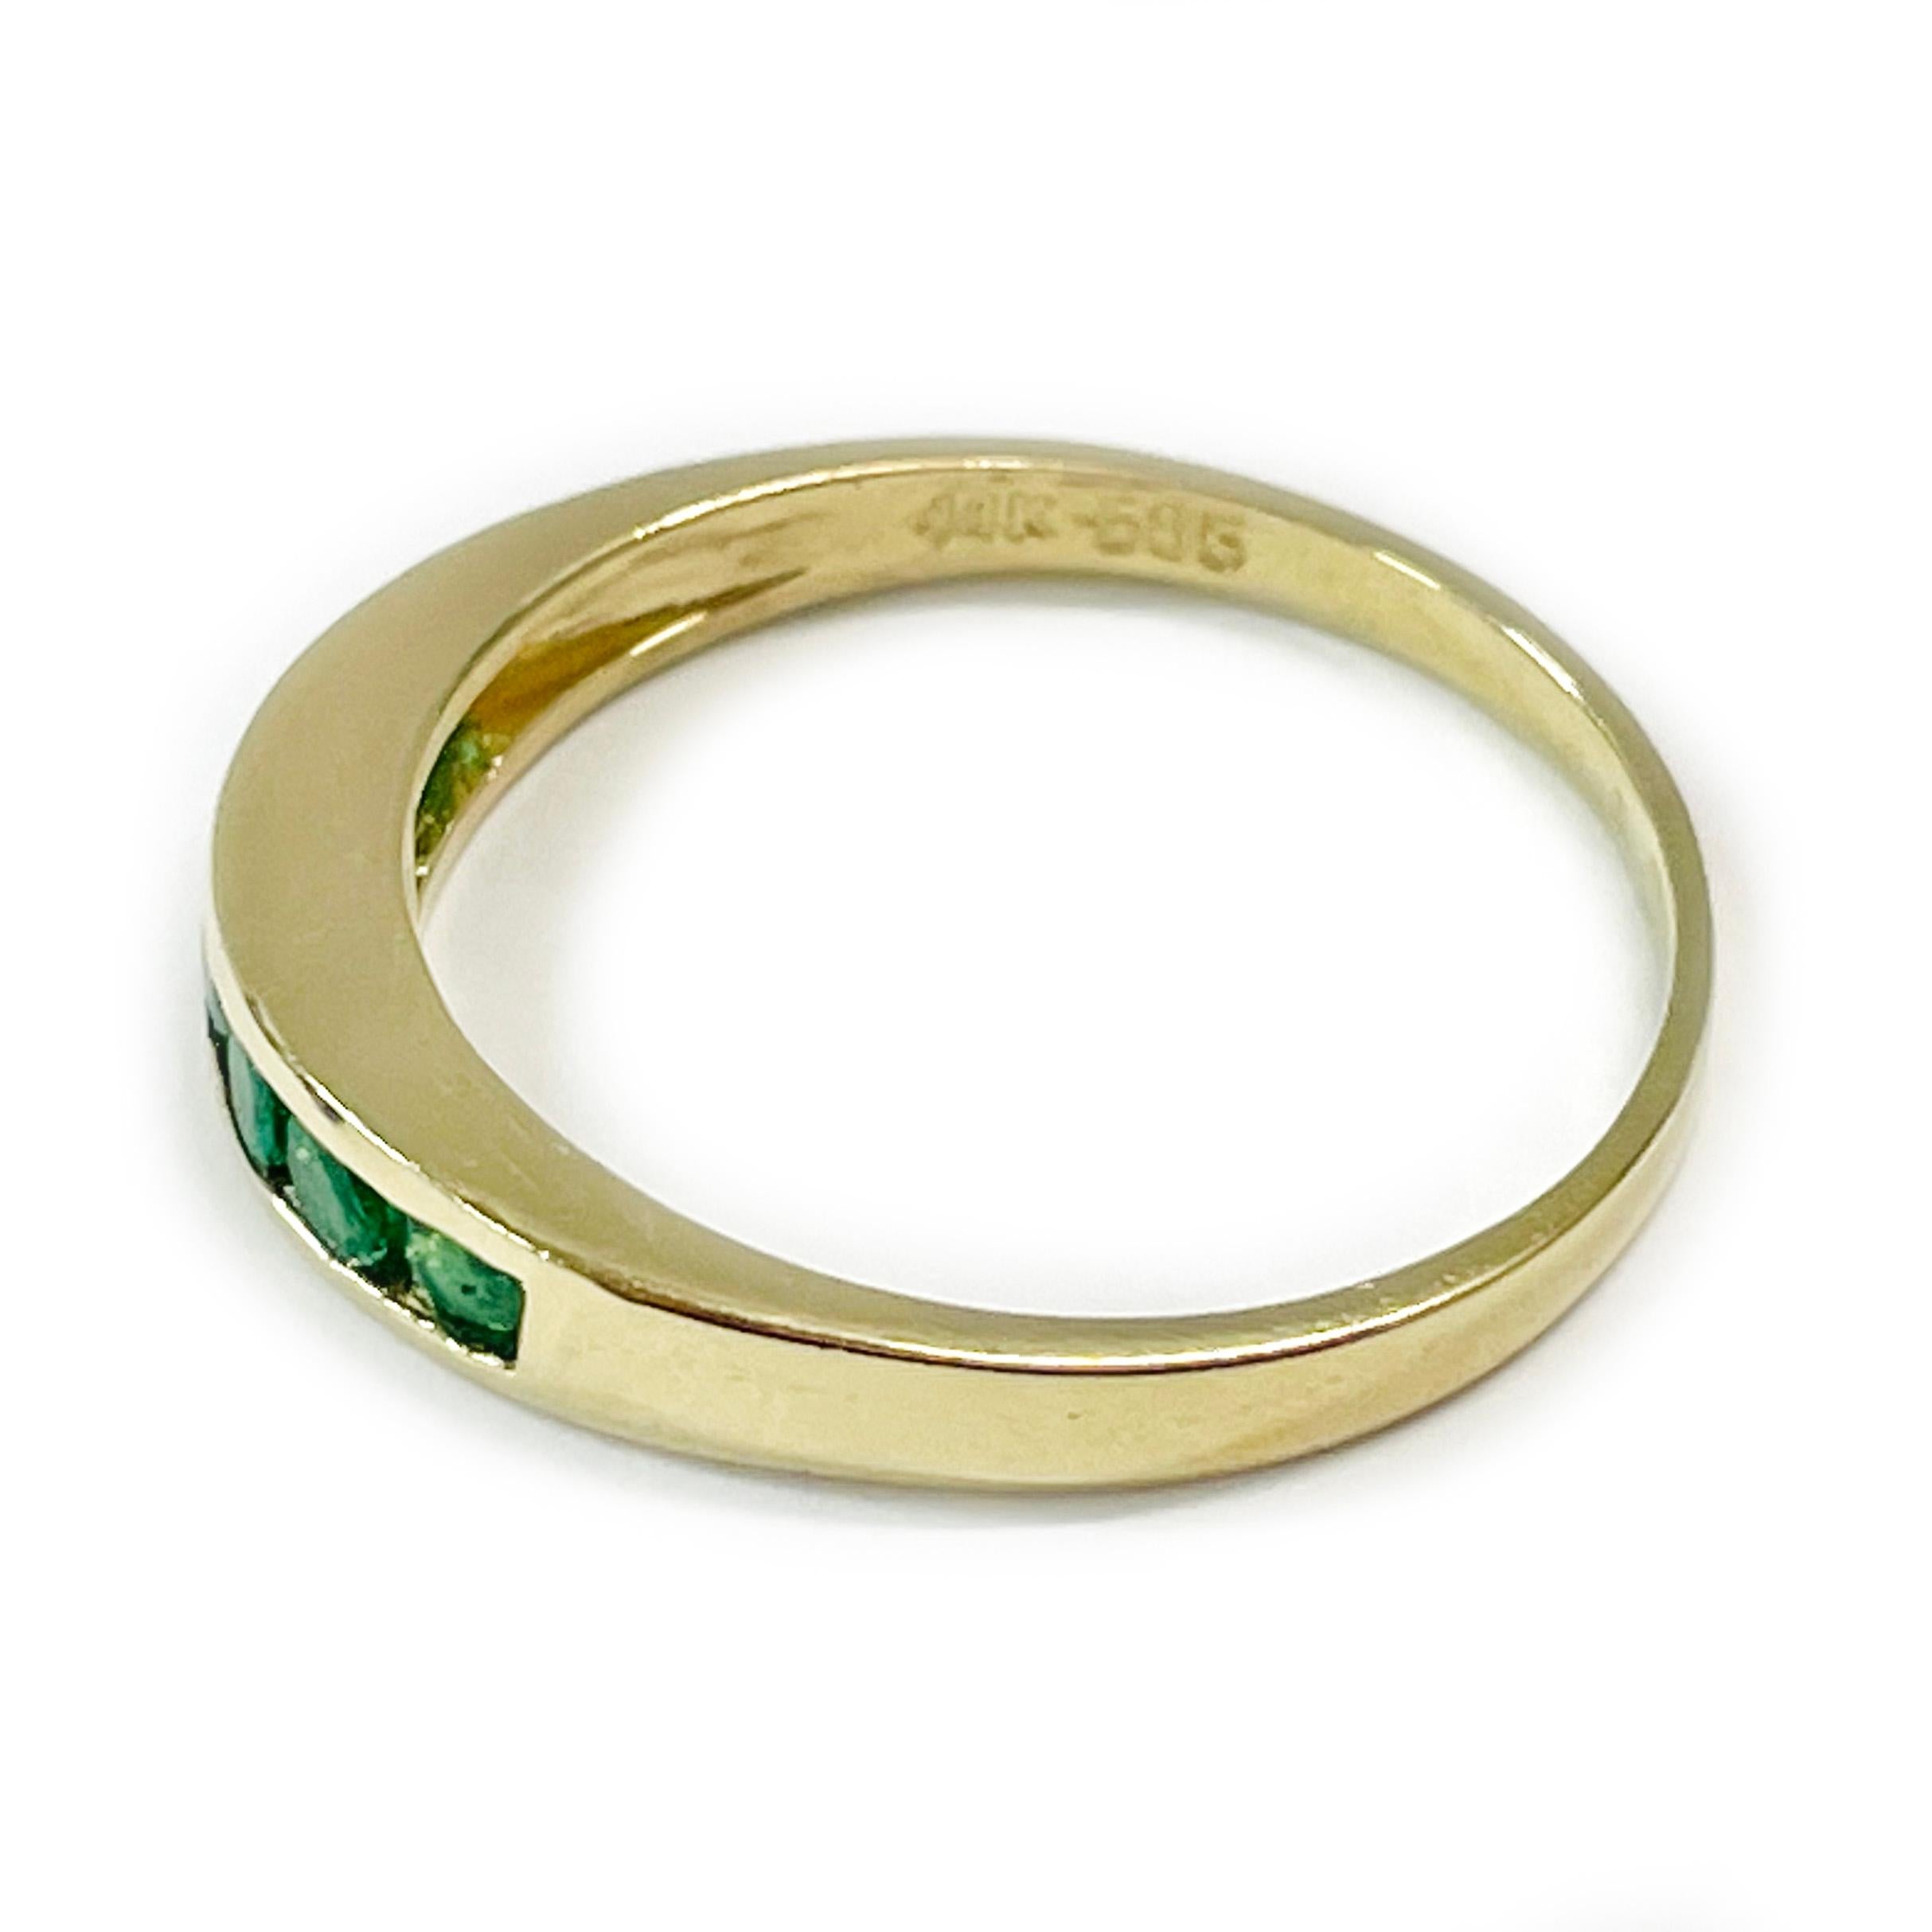 14 Karat Yellow Gold Channel-Set Emerald Ring. The ring features six 3.1mm round channel-set green emeralds. The total weight of the emeralds are 0.66ctw. The ring has a smooth shiny finish with a slight taper. Stamped on the inside of the band are